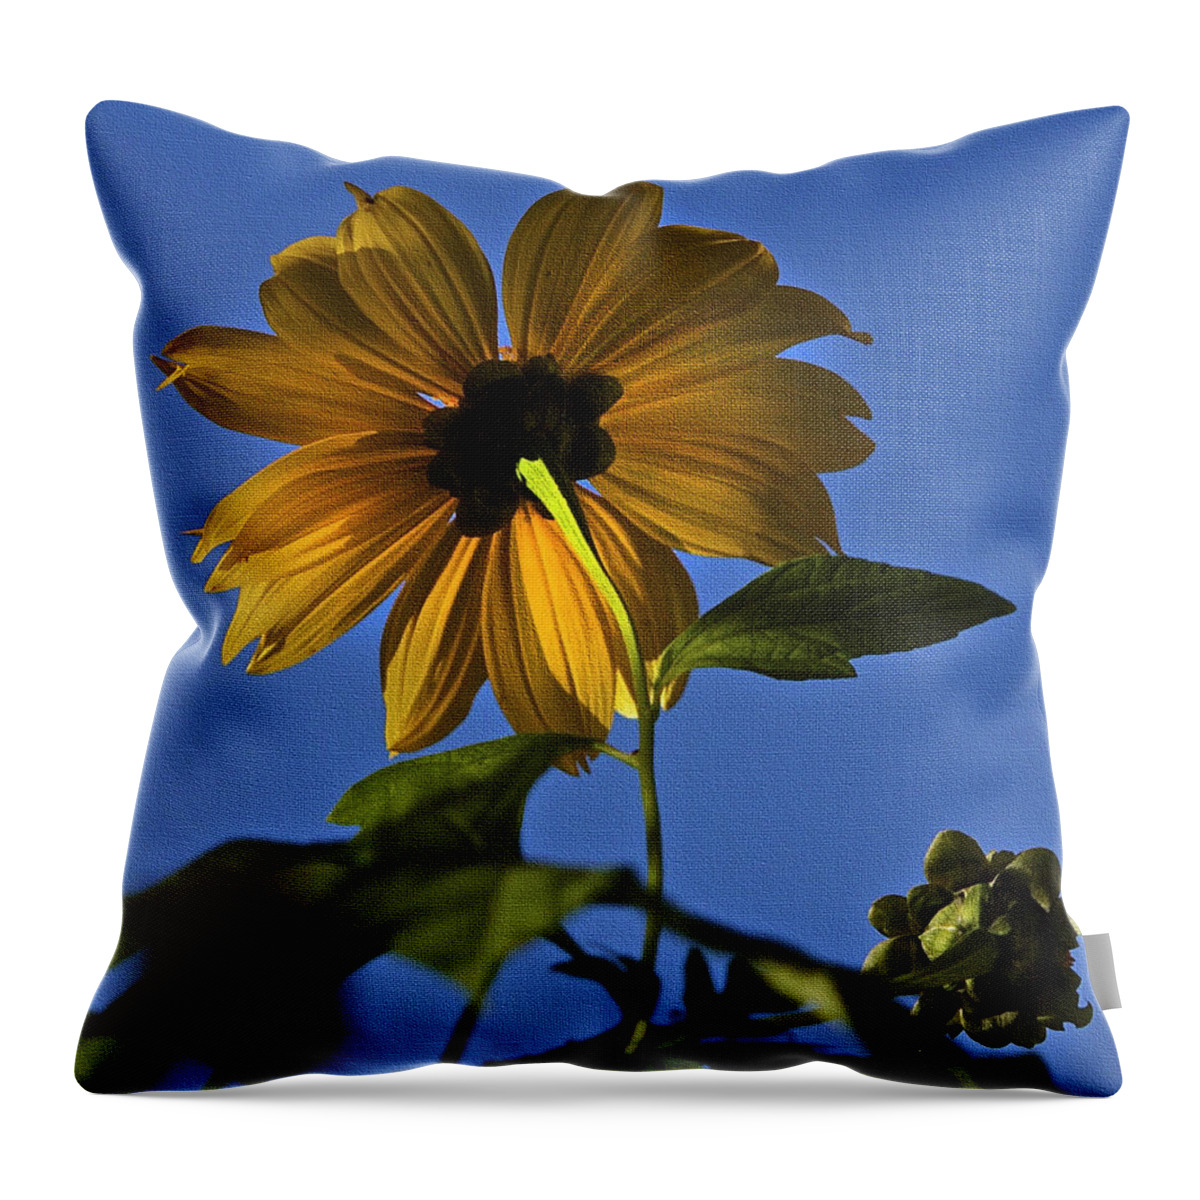 Landscape Art Throw Pillow featuring the photograph A Perfect Bloom by Kandy Hurley